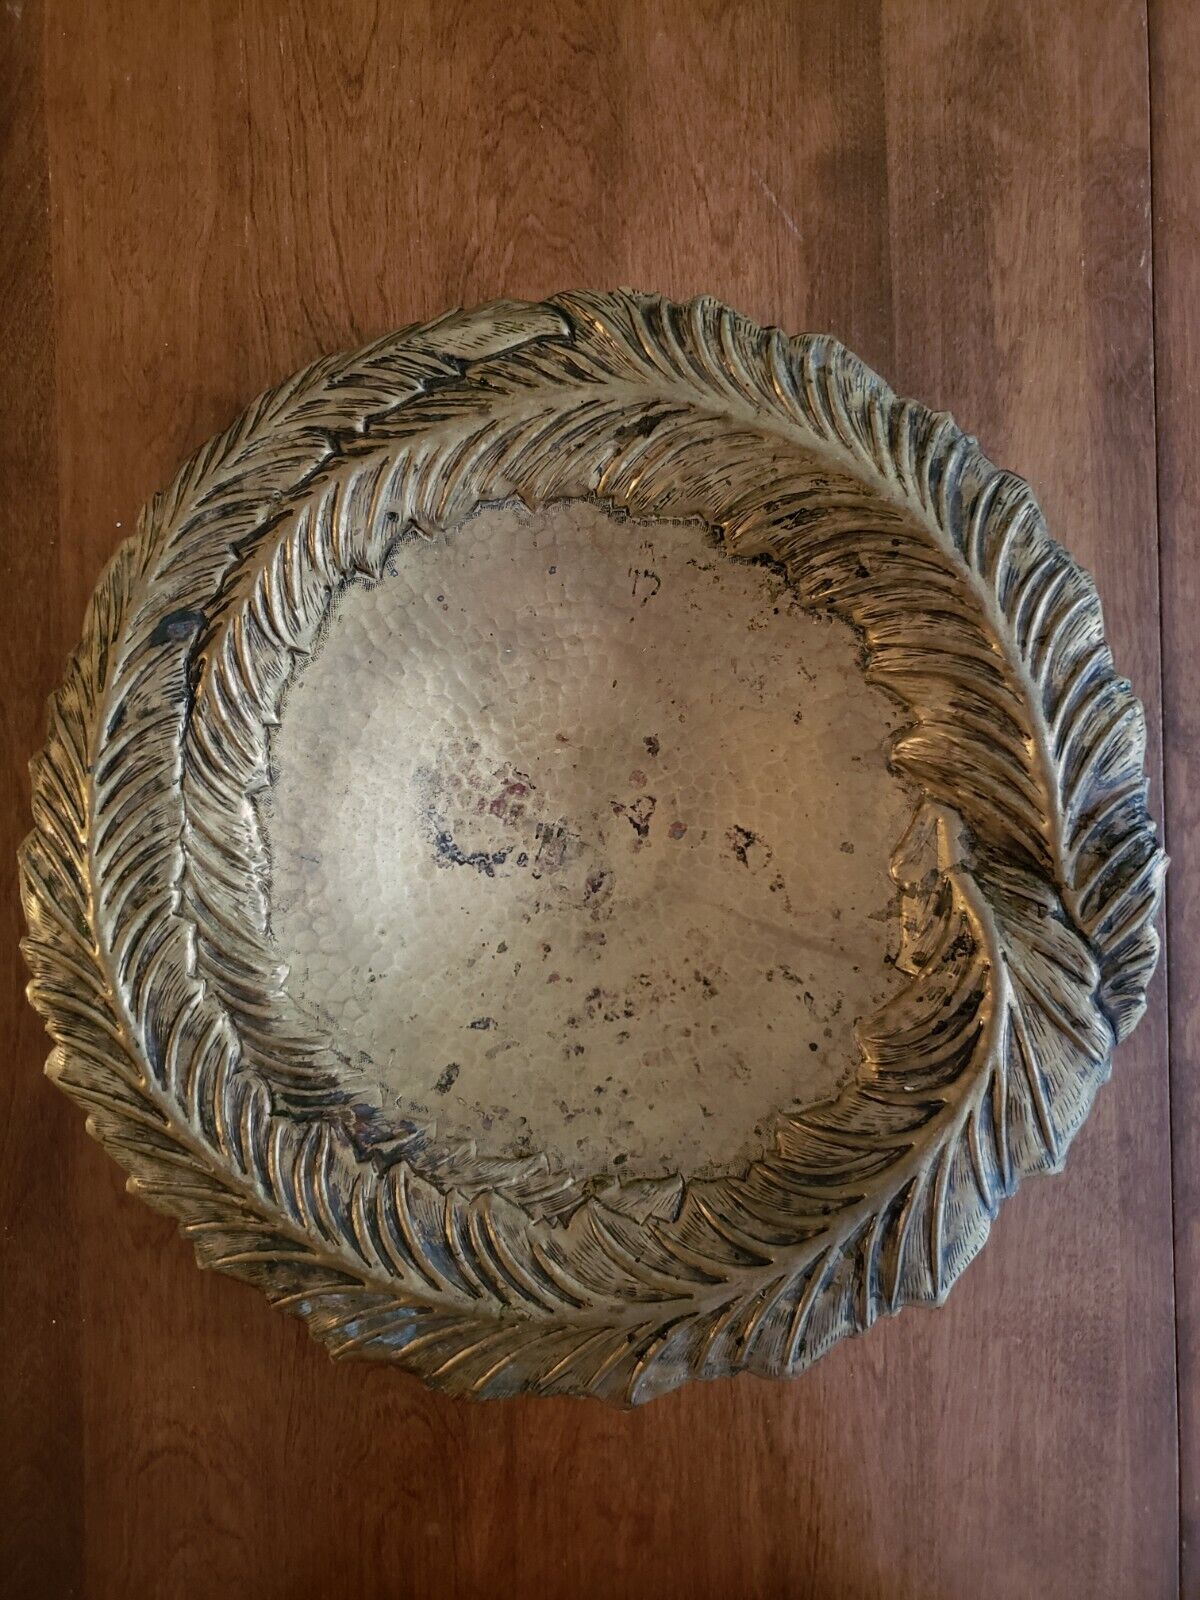 SALE *Large Vintage Mid-Modern Brass Footed Tray by Egidio Casagrande*